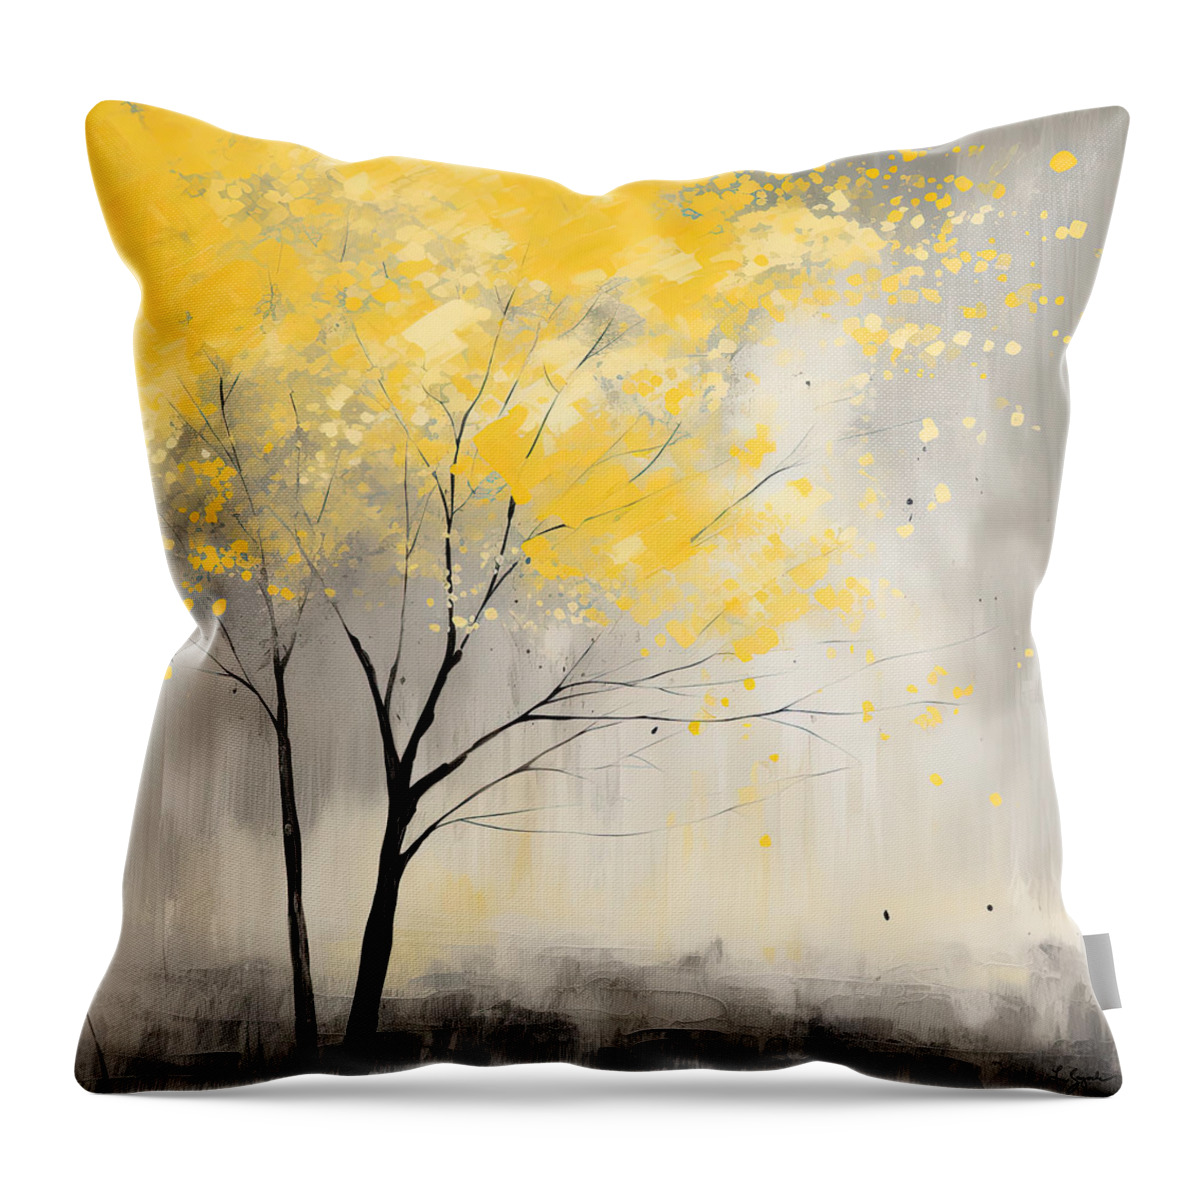 Yellow Throw Pillow featuring the digital art Yellow and Gray Serenity by Lourry Legarde